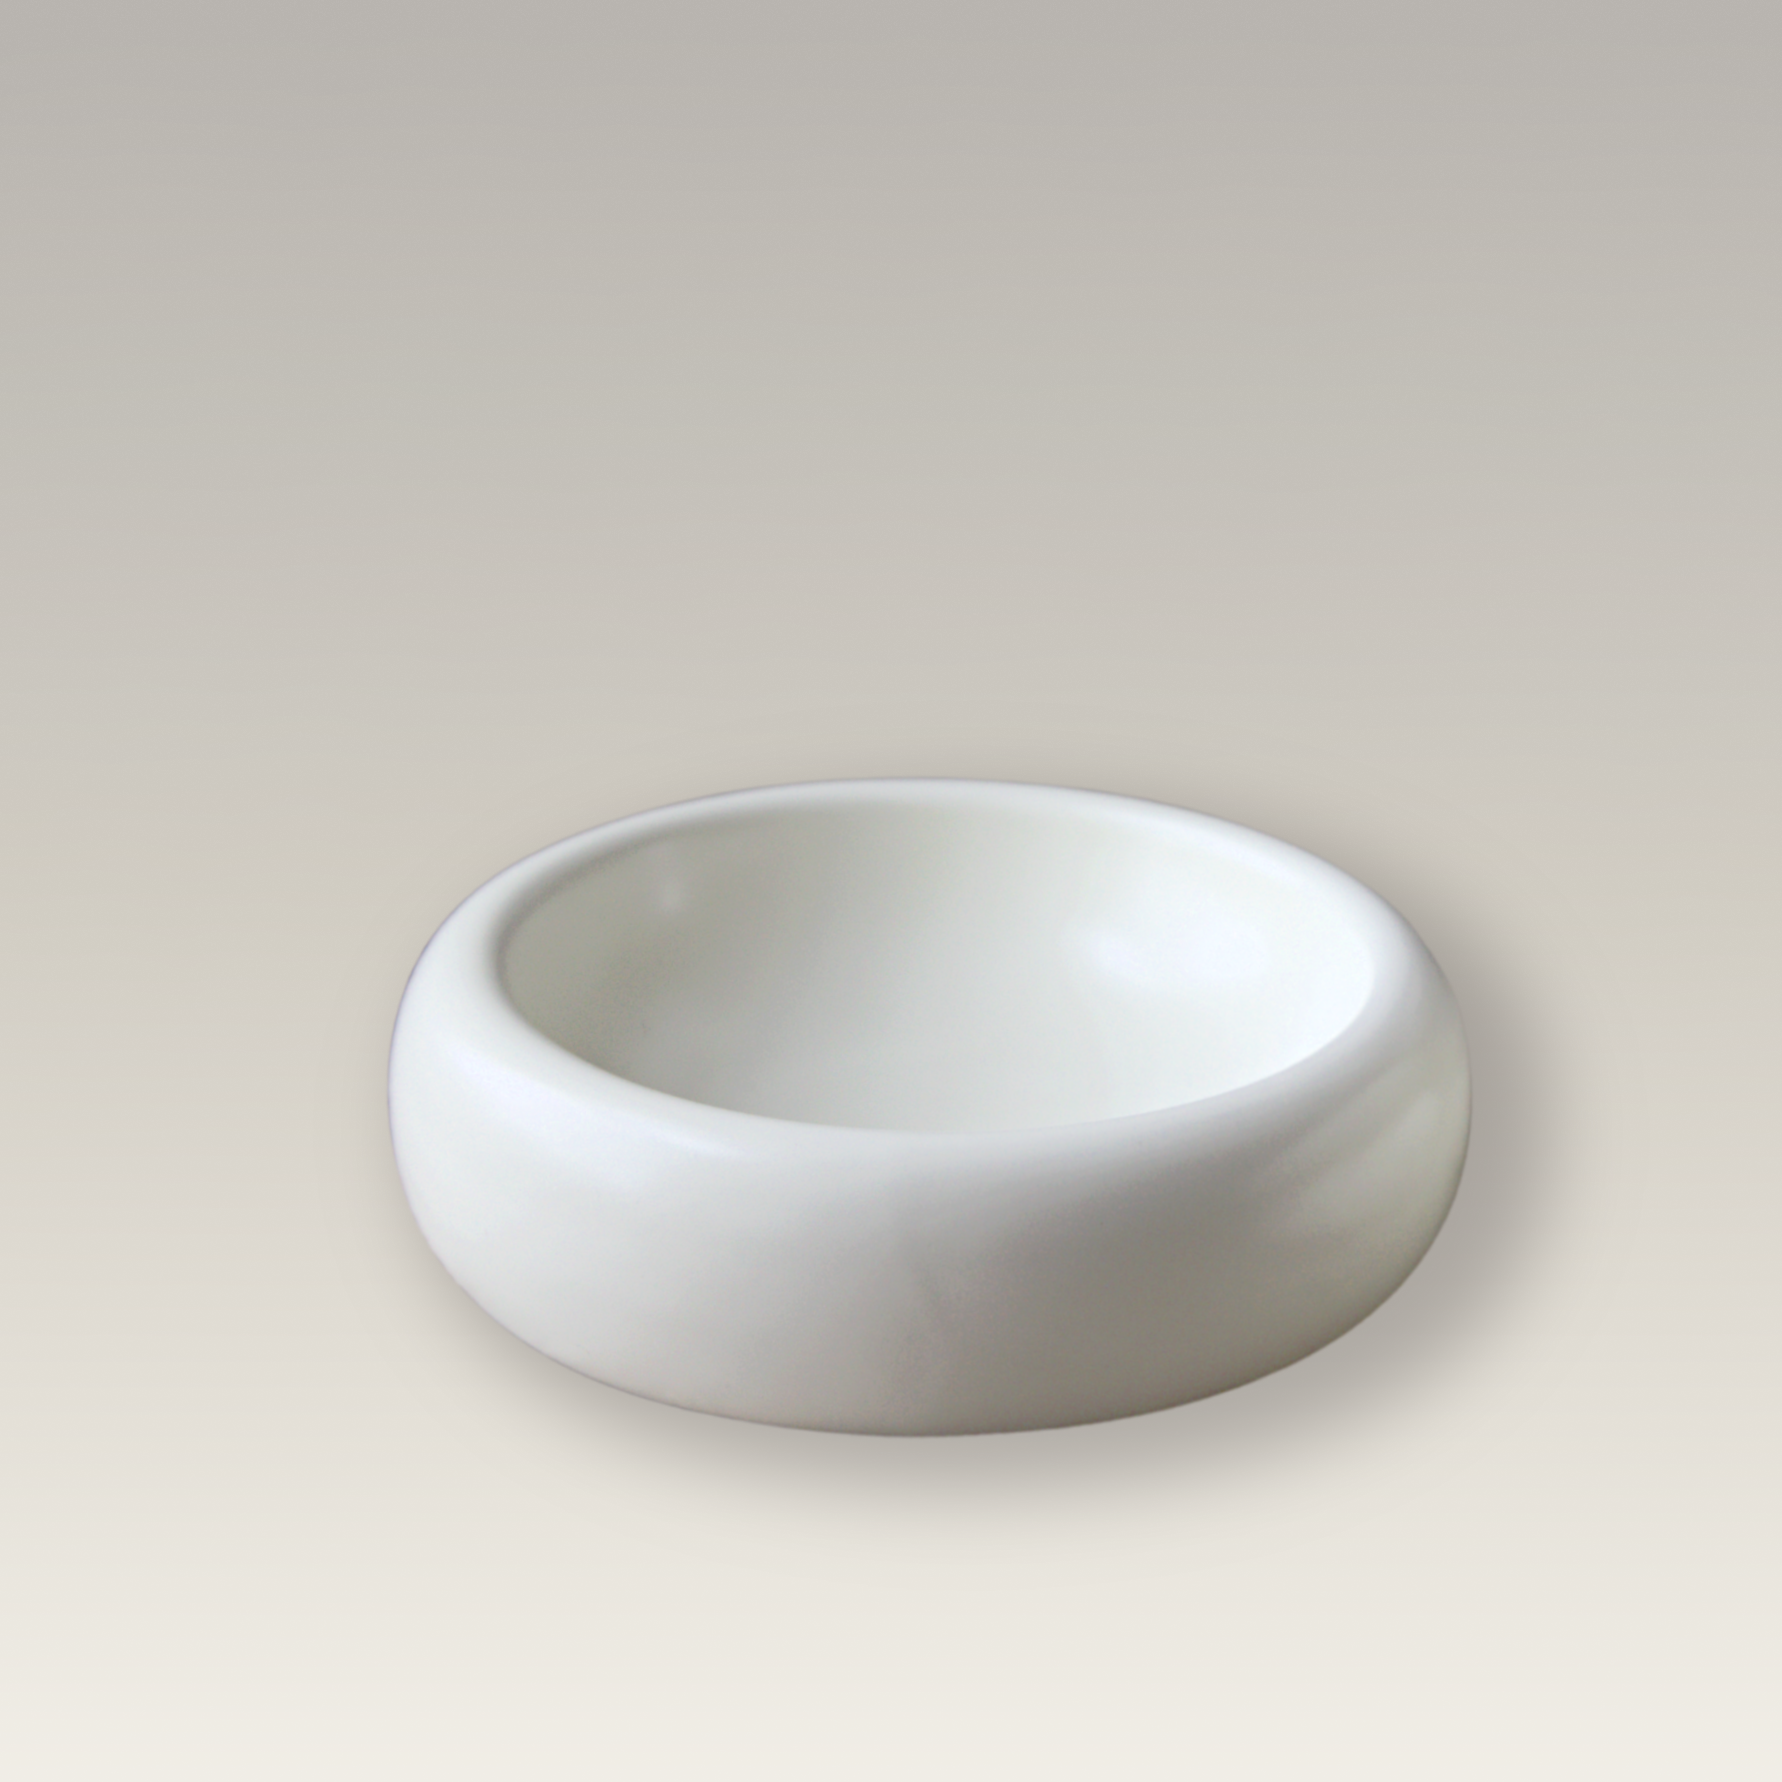 product image of modern cat food bowl on beige background with wide and shallow design to prevent whisker fatigue